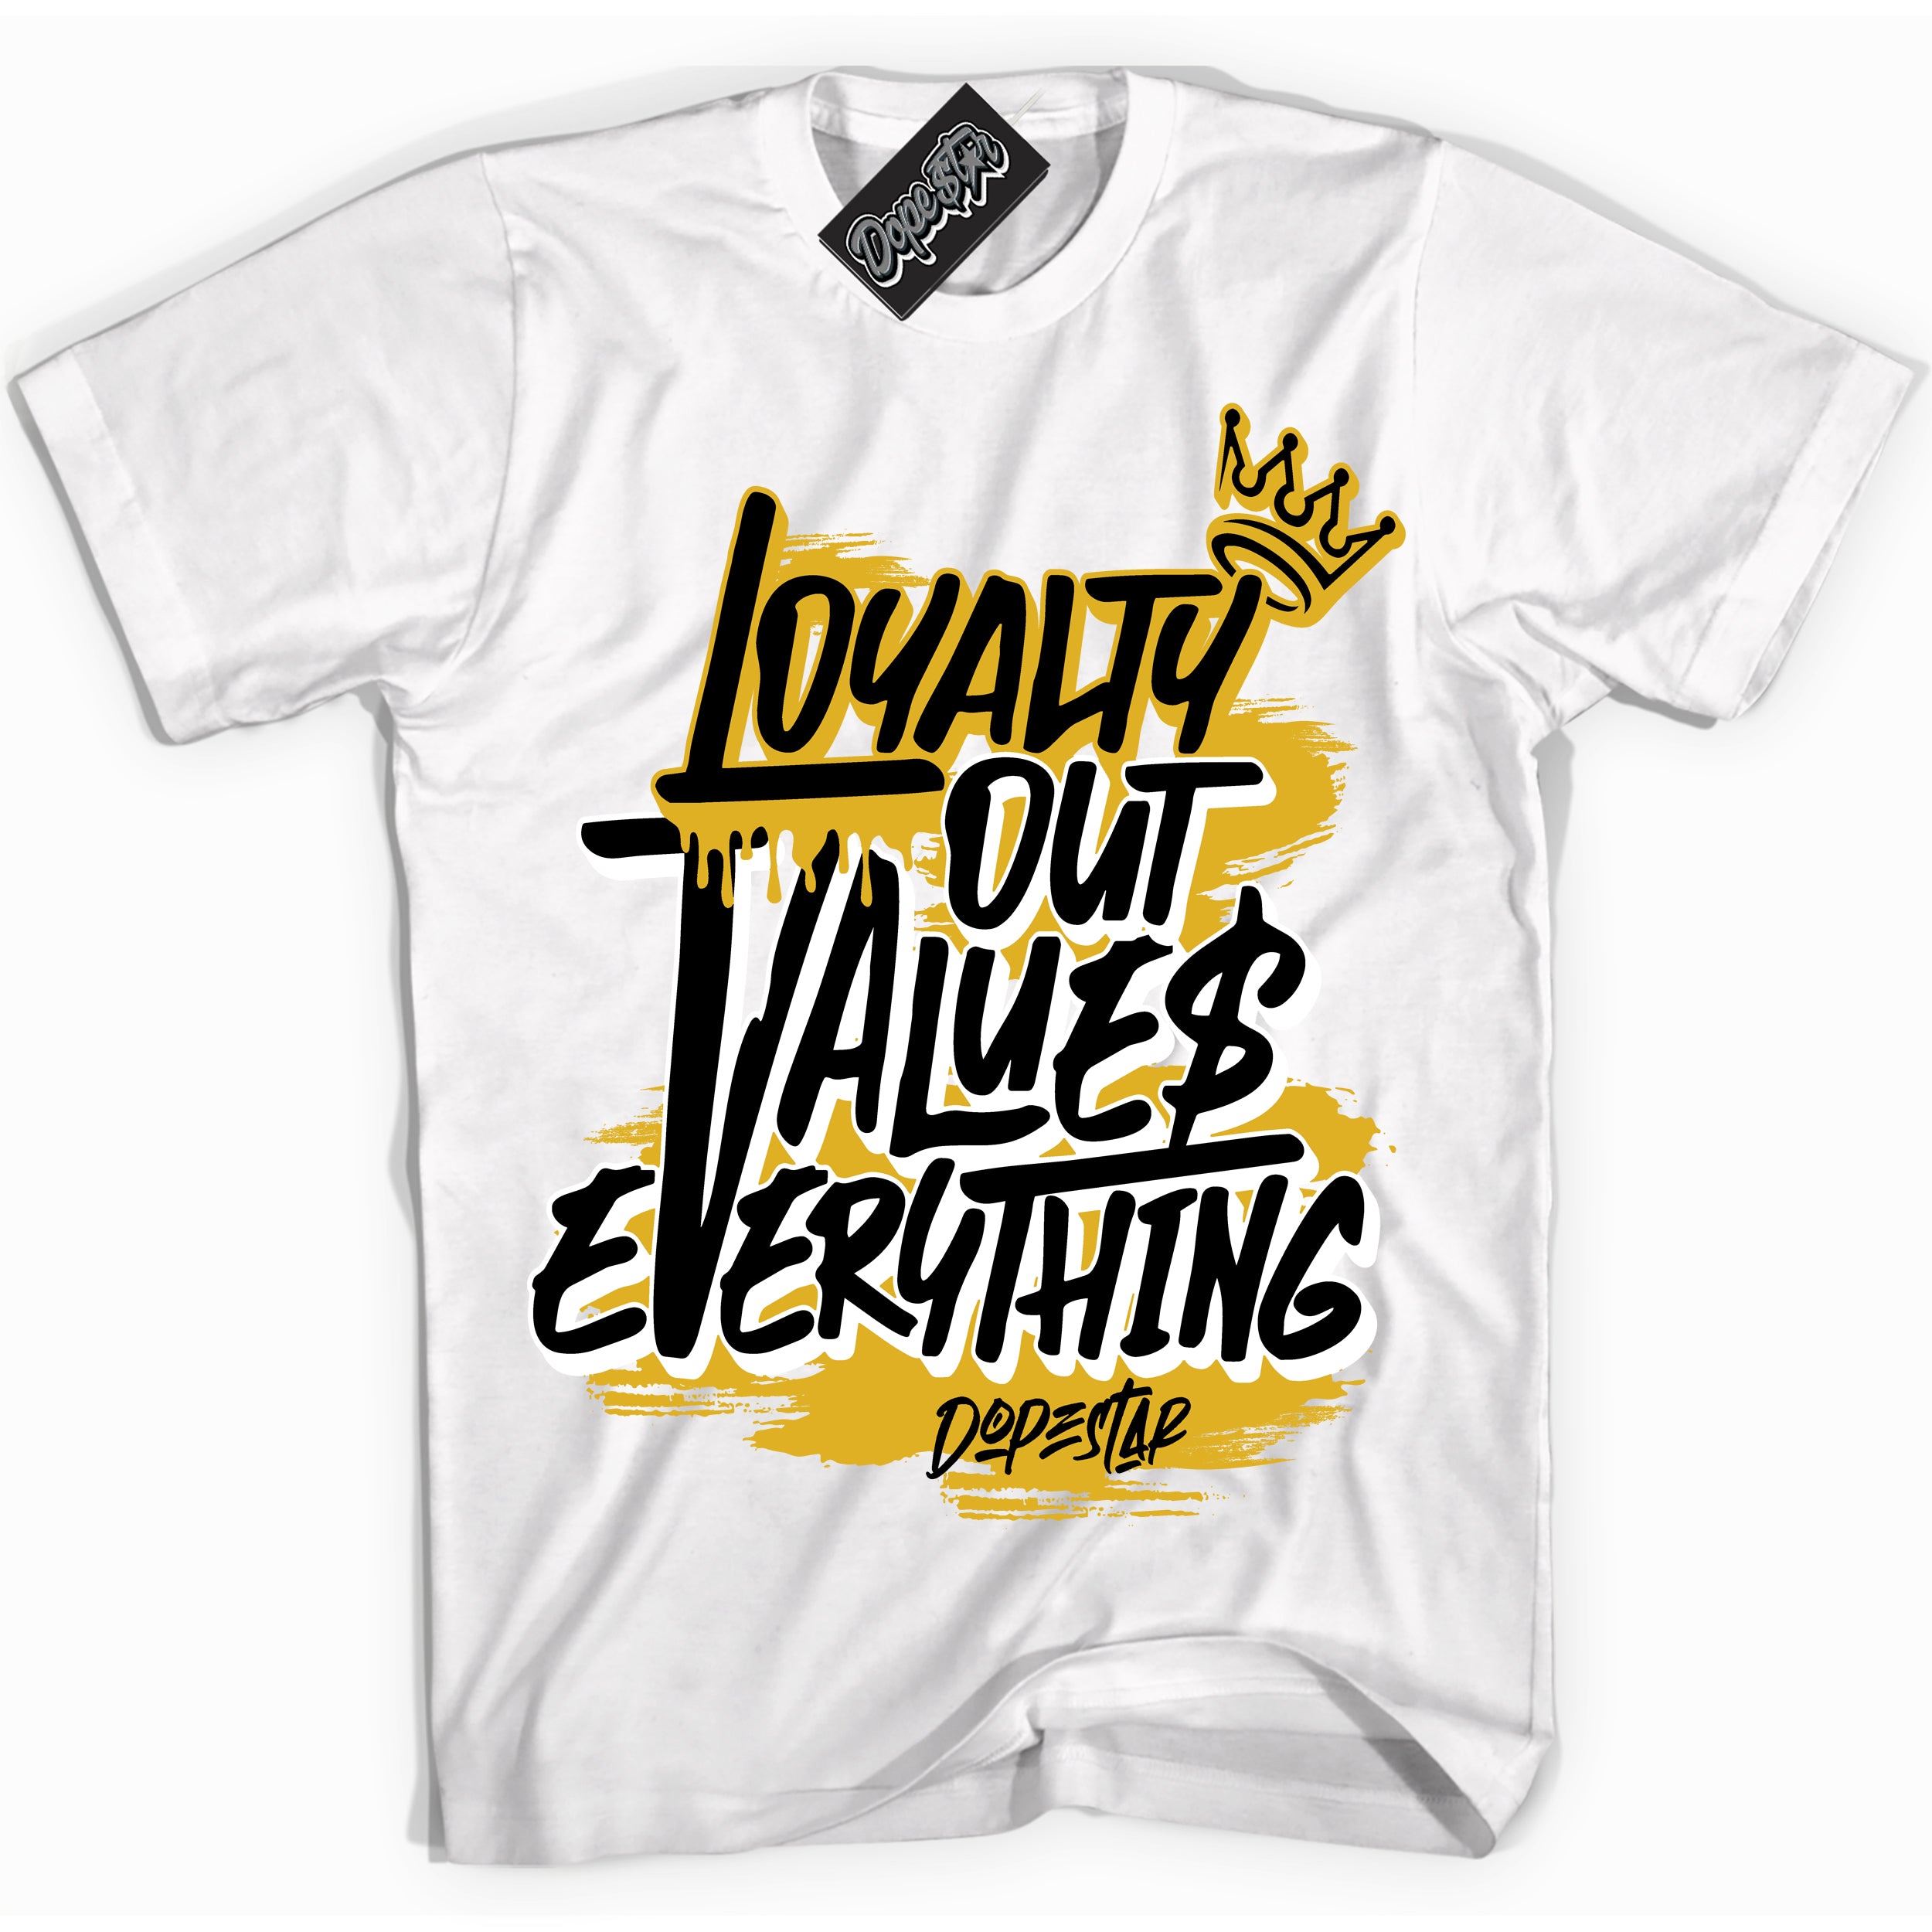 Cool White Shirt with “ Loyalty Out Values Everything” design that perfectly matches Taxi 1s Sneakers.